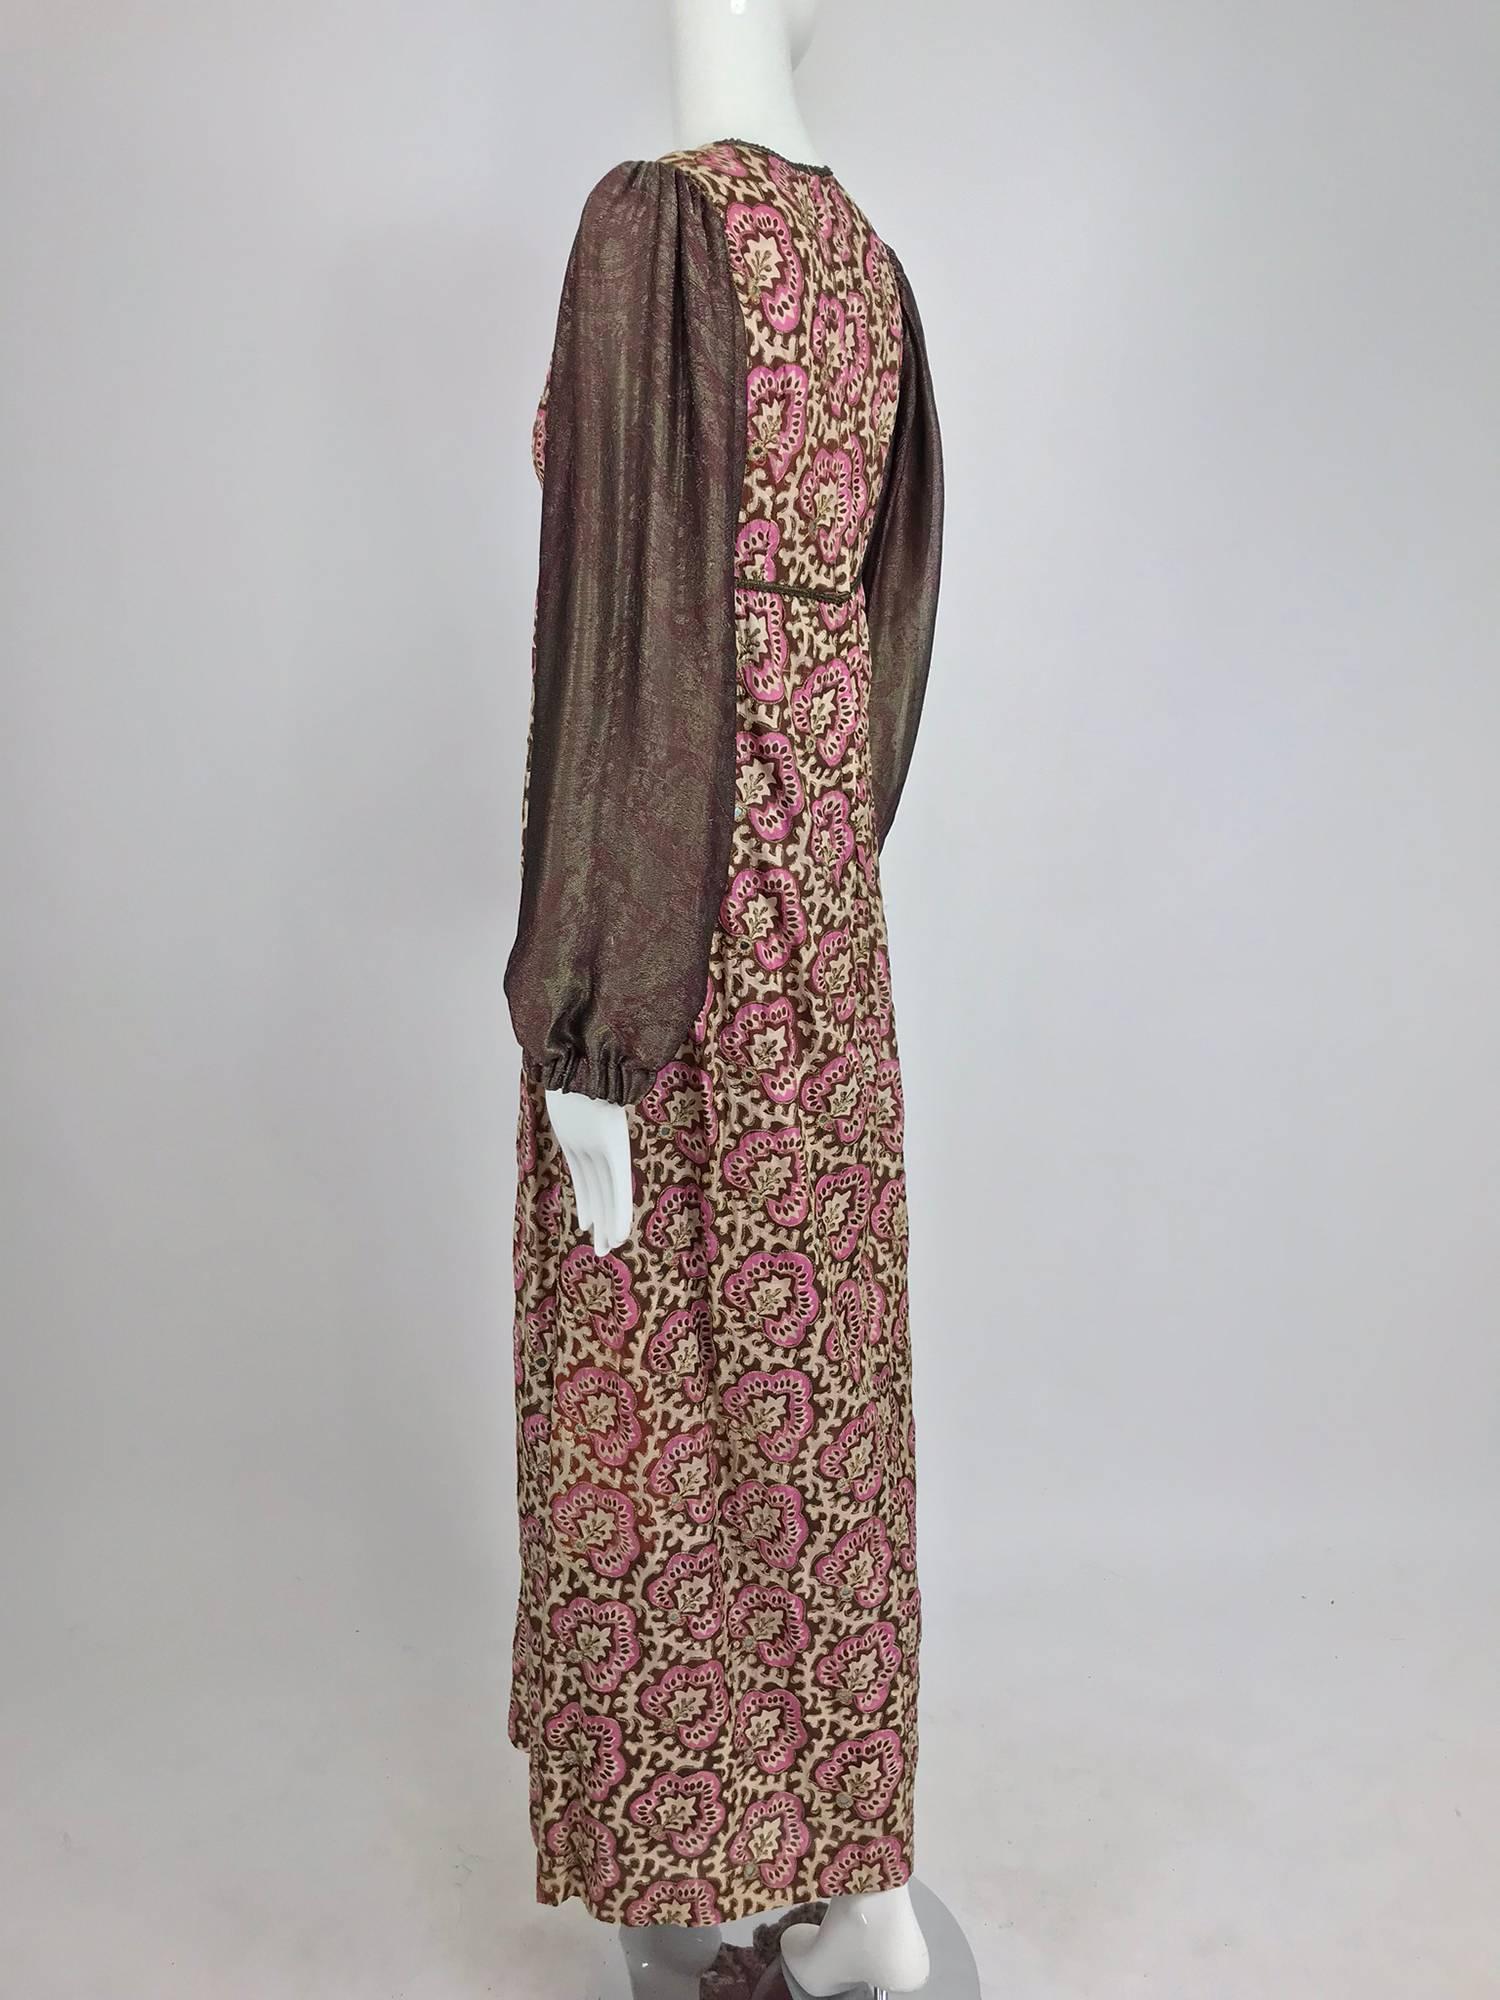 Women's Thea Porter printed mirrored silk maxi dress with gold shot sleeves 1970s